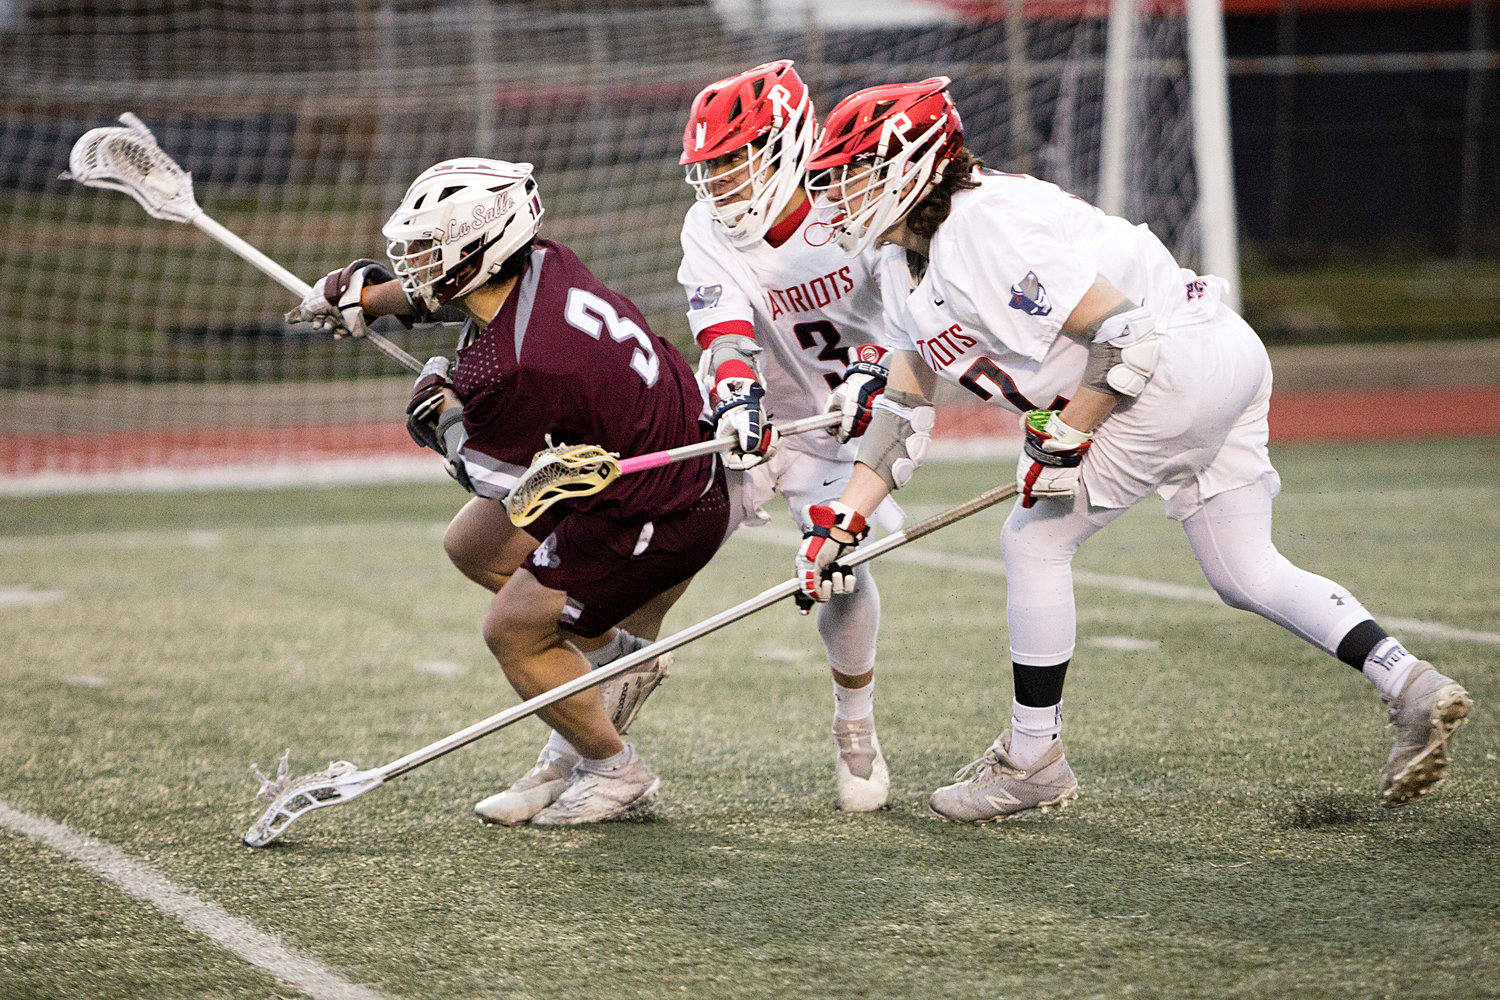 Marcus Evans and Joe Rocco (right) pressure a La Salle opponent from behind.